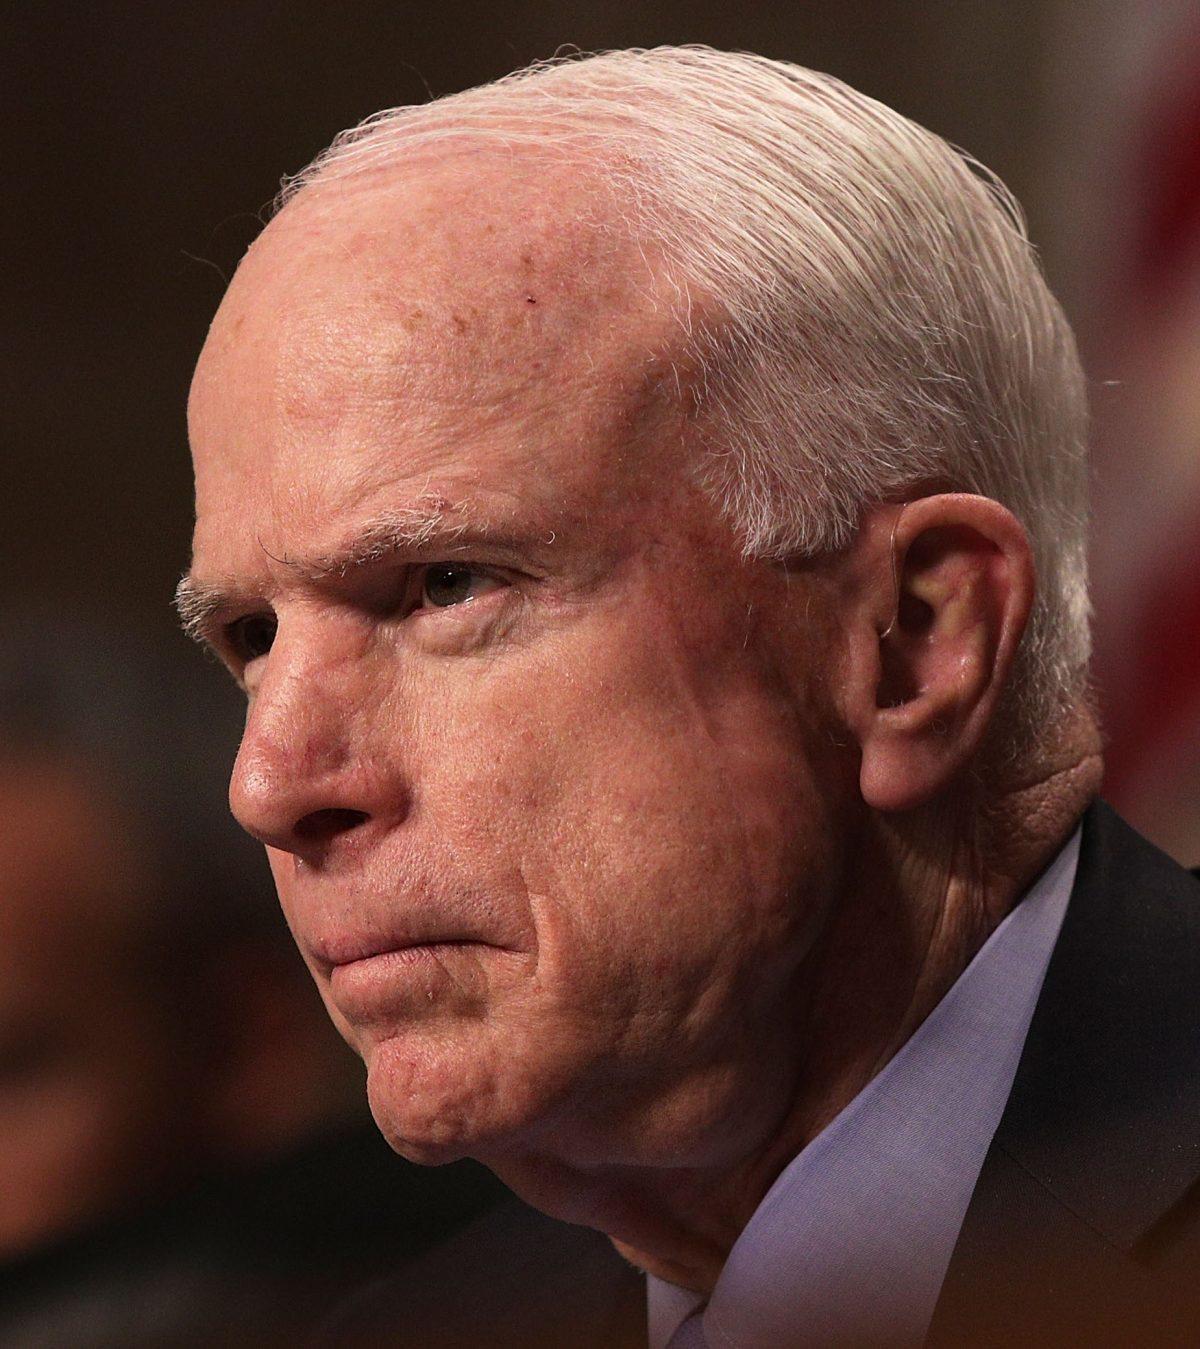 Sen. John McCain commissioned one of Steele's memos. (Alex Wong/Getty Images)